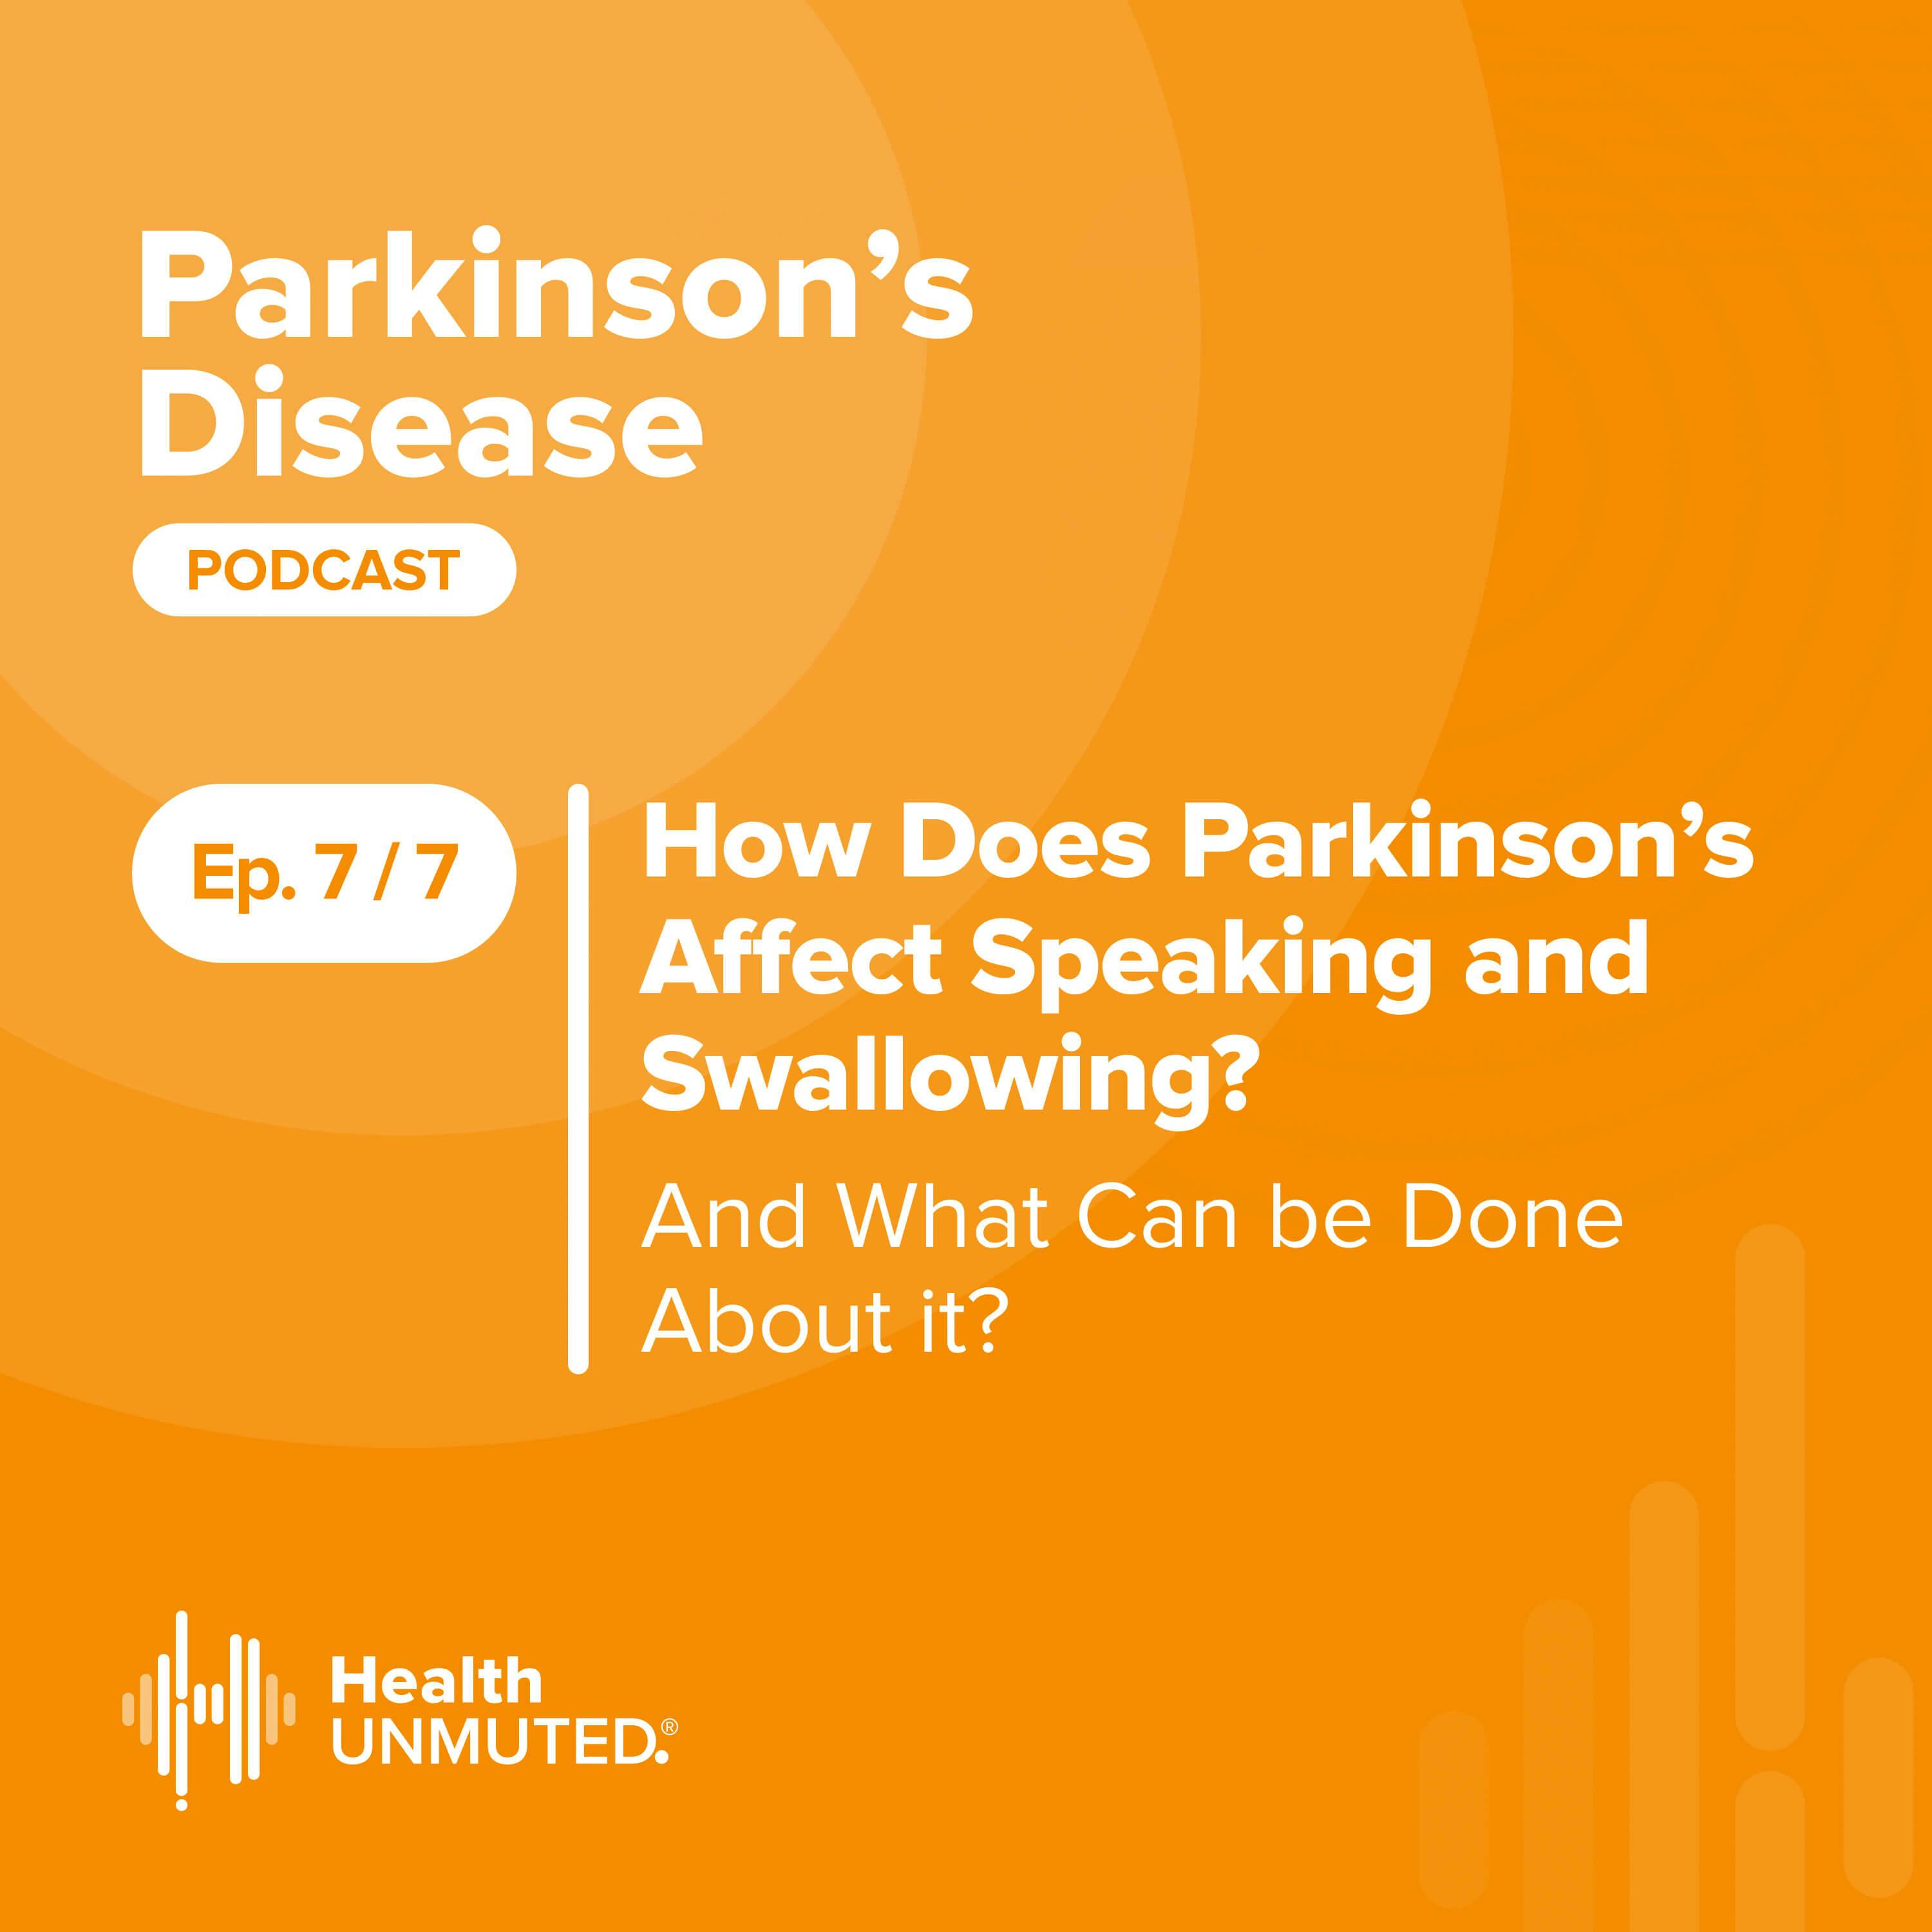 Ep 2: How is Parkinson’s Disease Diagnosed? And How Is a Care Team Created?